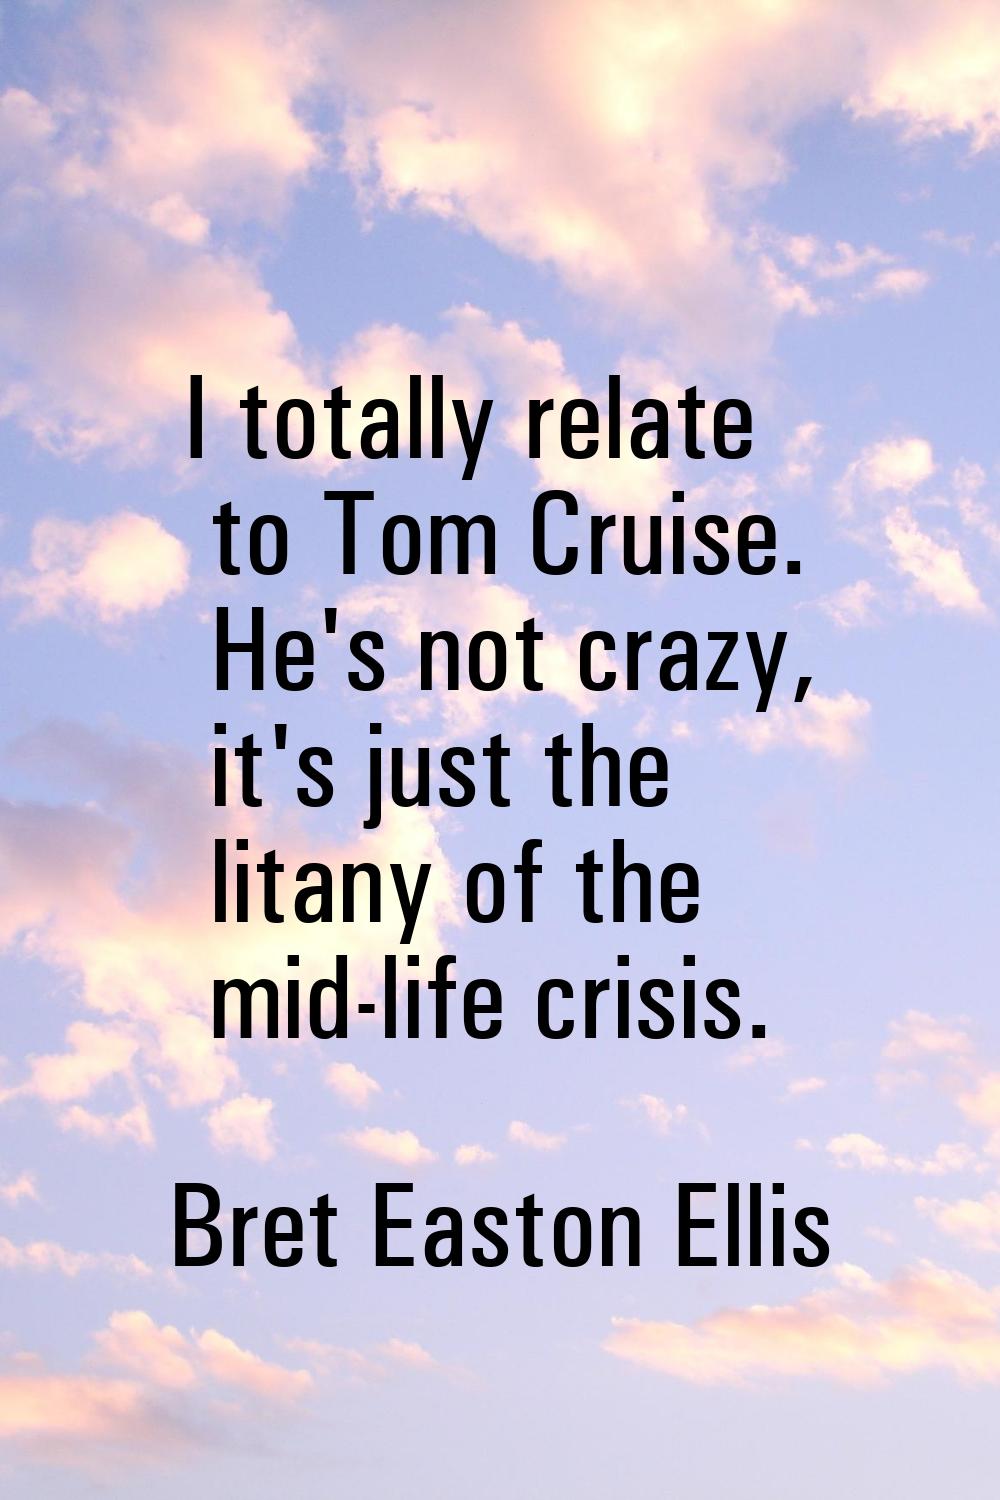 I totally relate to Tom Cruise. He's not crazy, it's just the litany of the mid-life crisis.